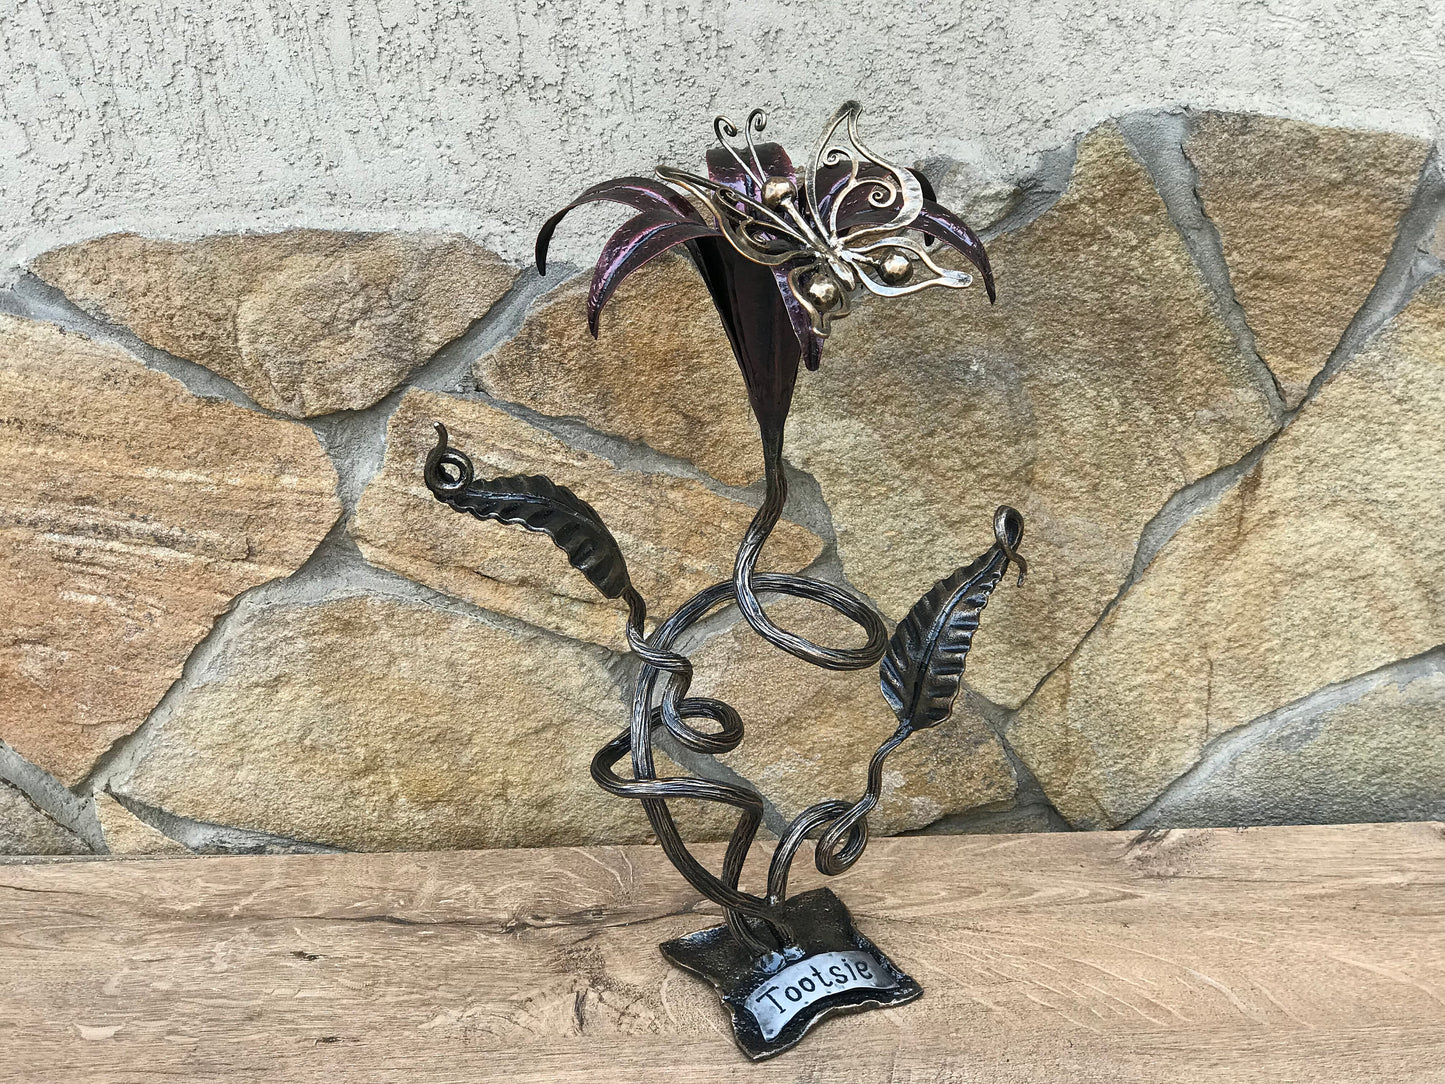 Personalized iron gift, iron lily, iron gifts,iron gift for her,iron sculpture,iron rose,anniversary gift,iron anniversary gift,Mother's day